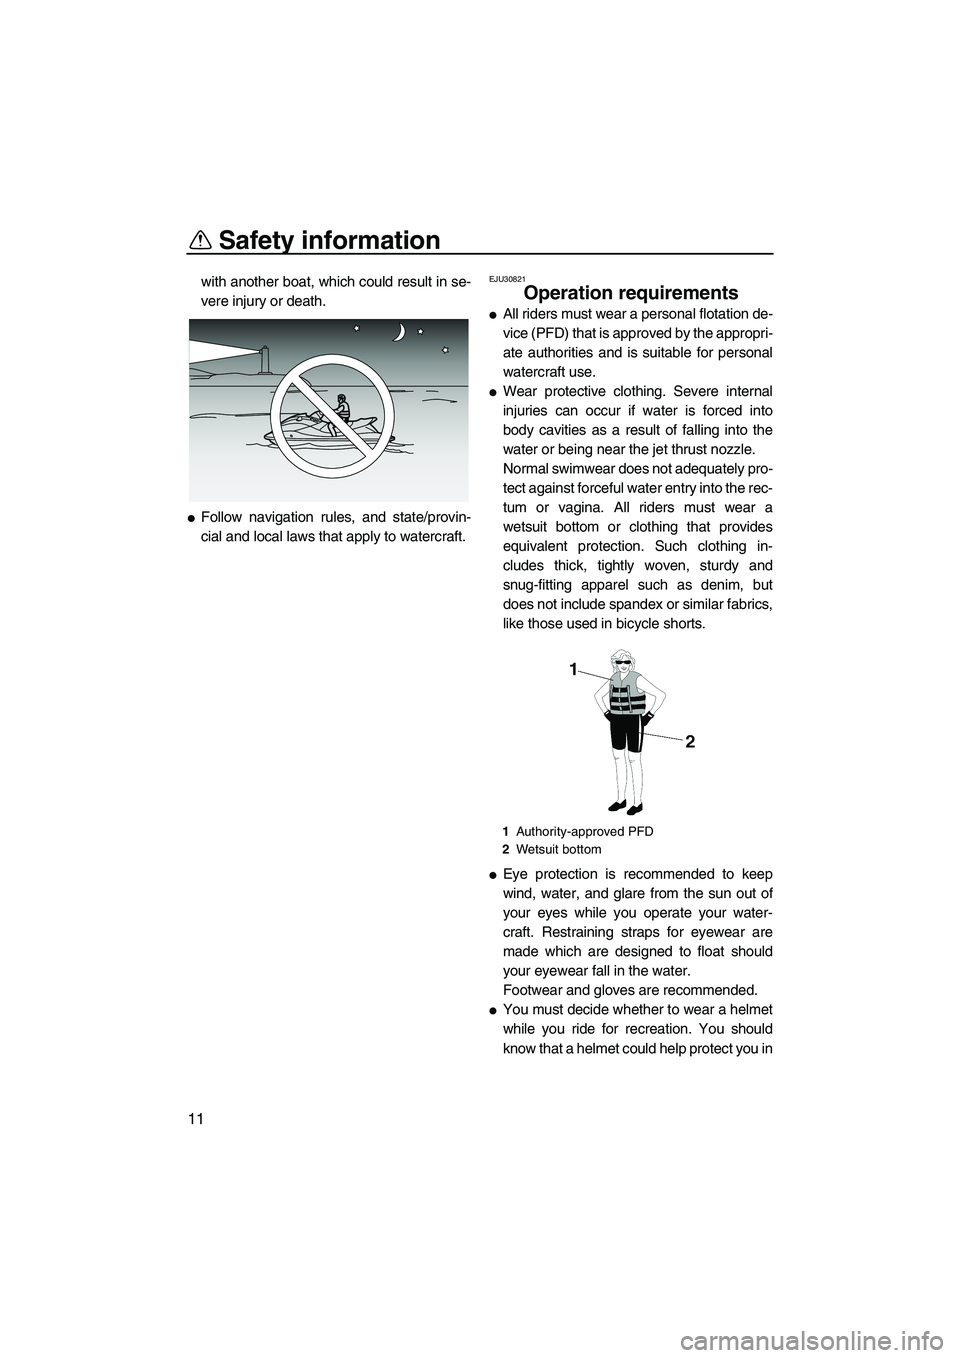 YAMAHA VX SPORT 2010 User Guide Safety information
11
with another boat, which could result in se-
vere injury or death.
Follow navigation rules, and state/provin-
cial and local laws that apply to watercraft.
EJU30821
Operation re